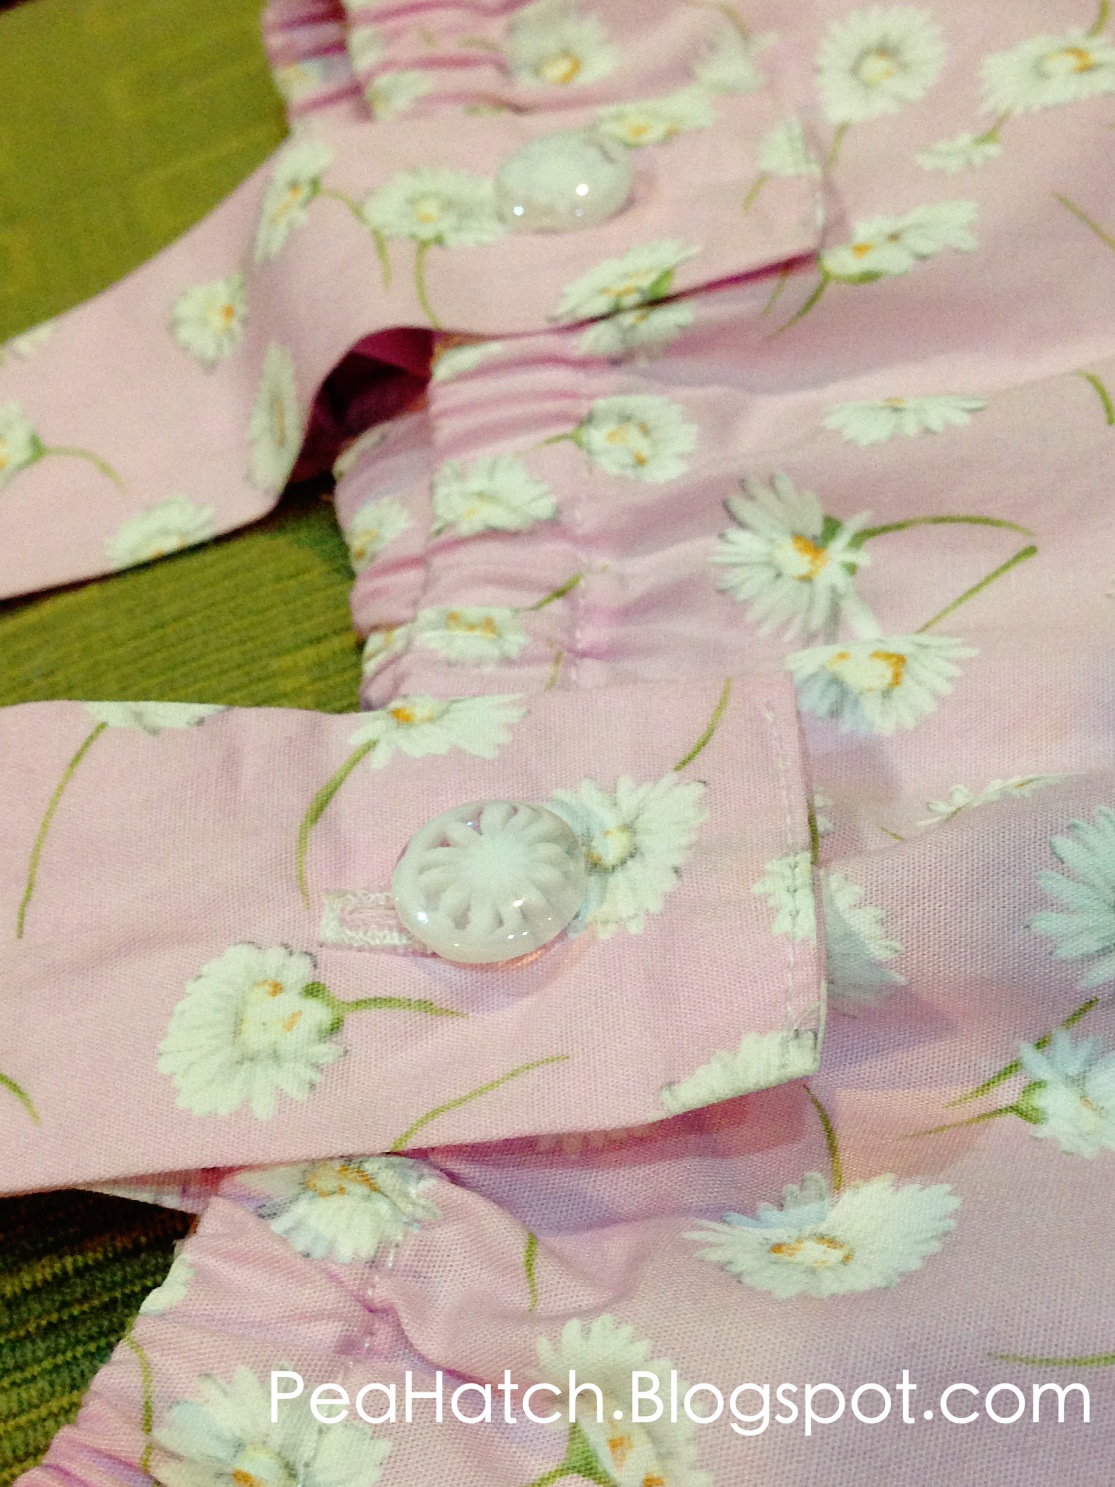 Pea Hatch Kids Store: The Flower Fairy: Little Daisies in Sweet Pink